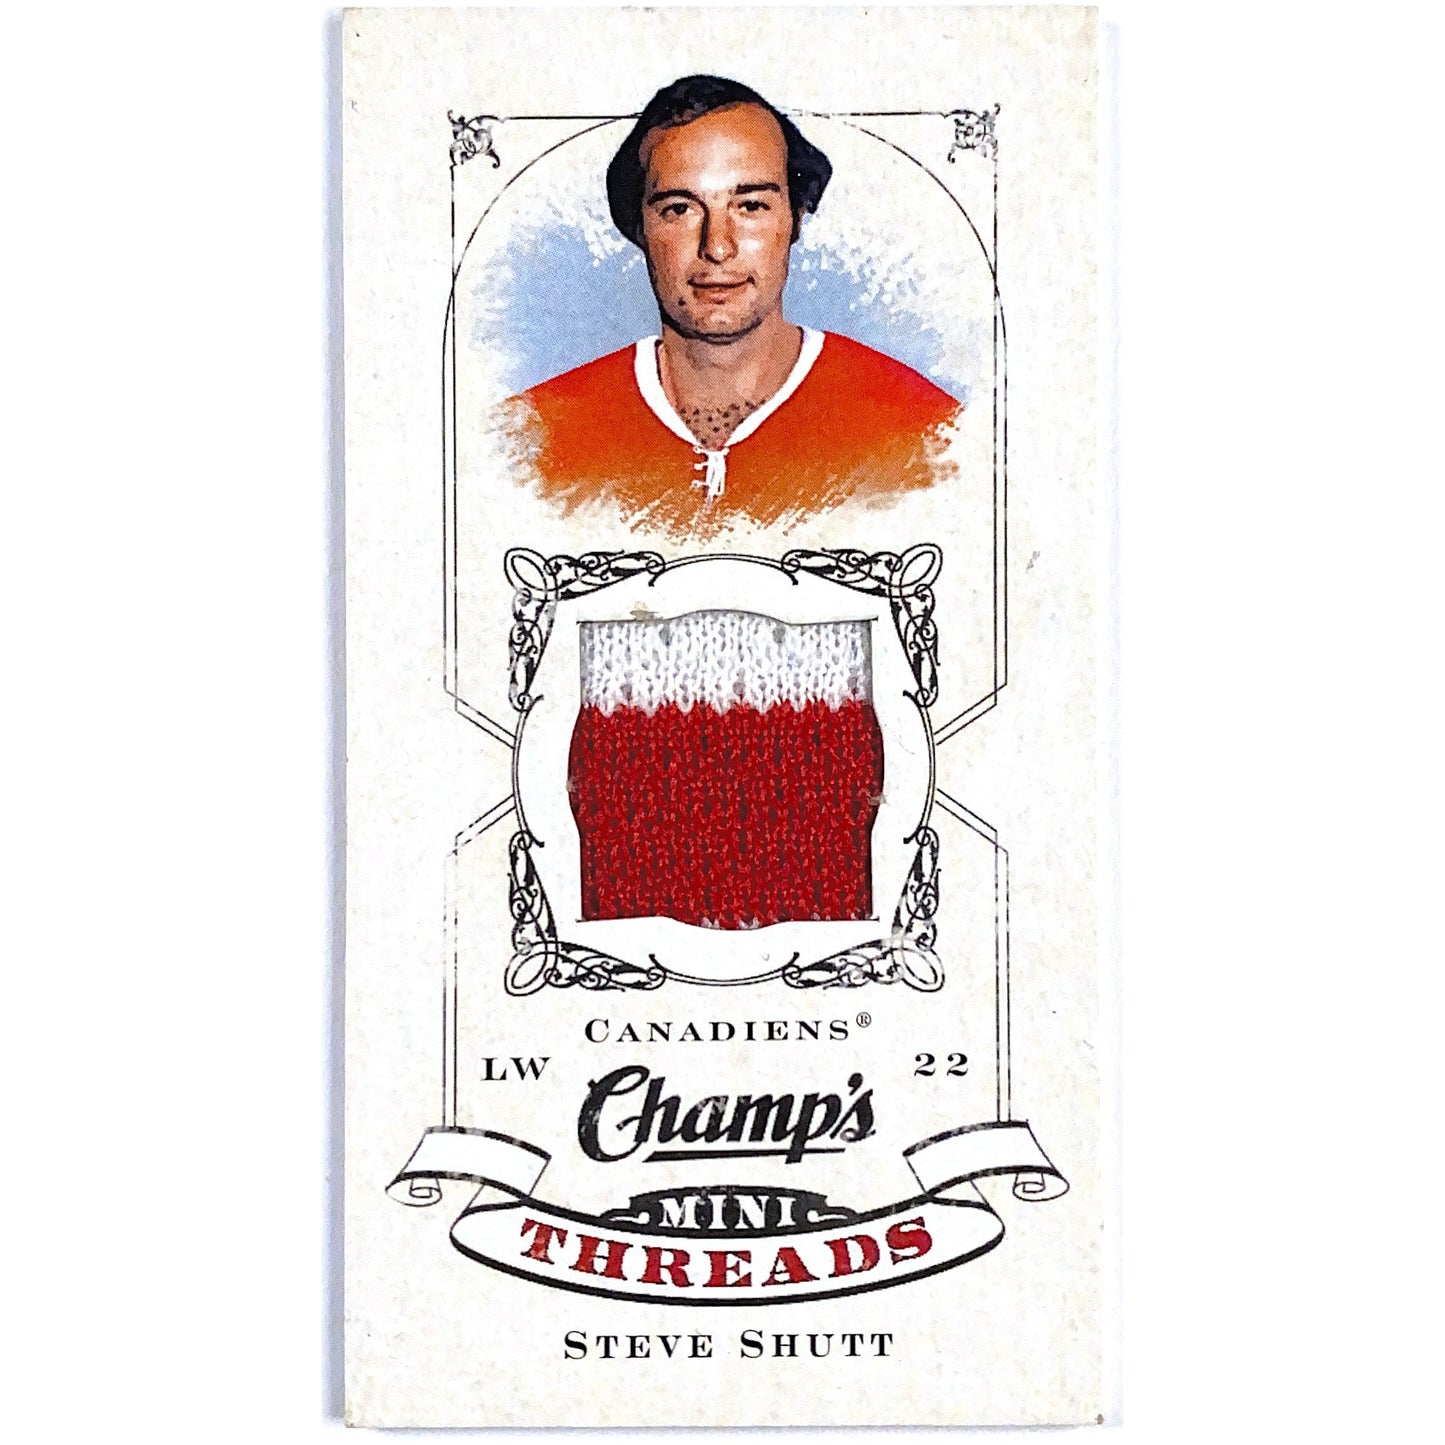 2008-09 Champs Steve Shutt Mini Threads Used Materials Patch